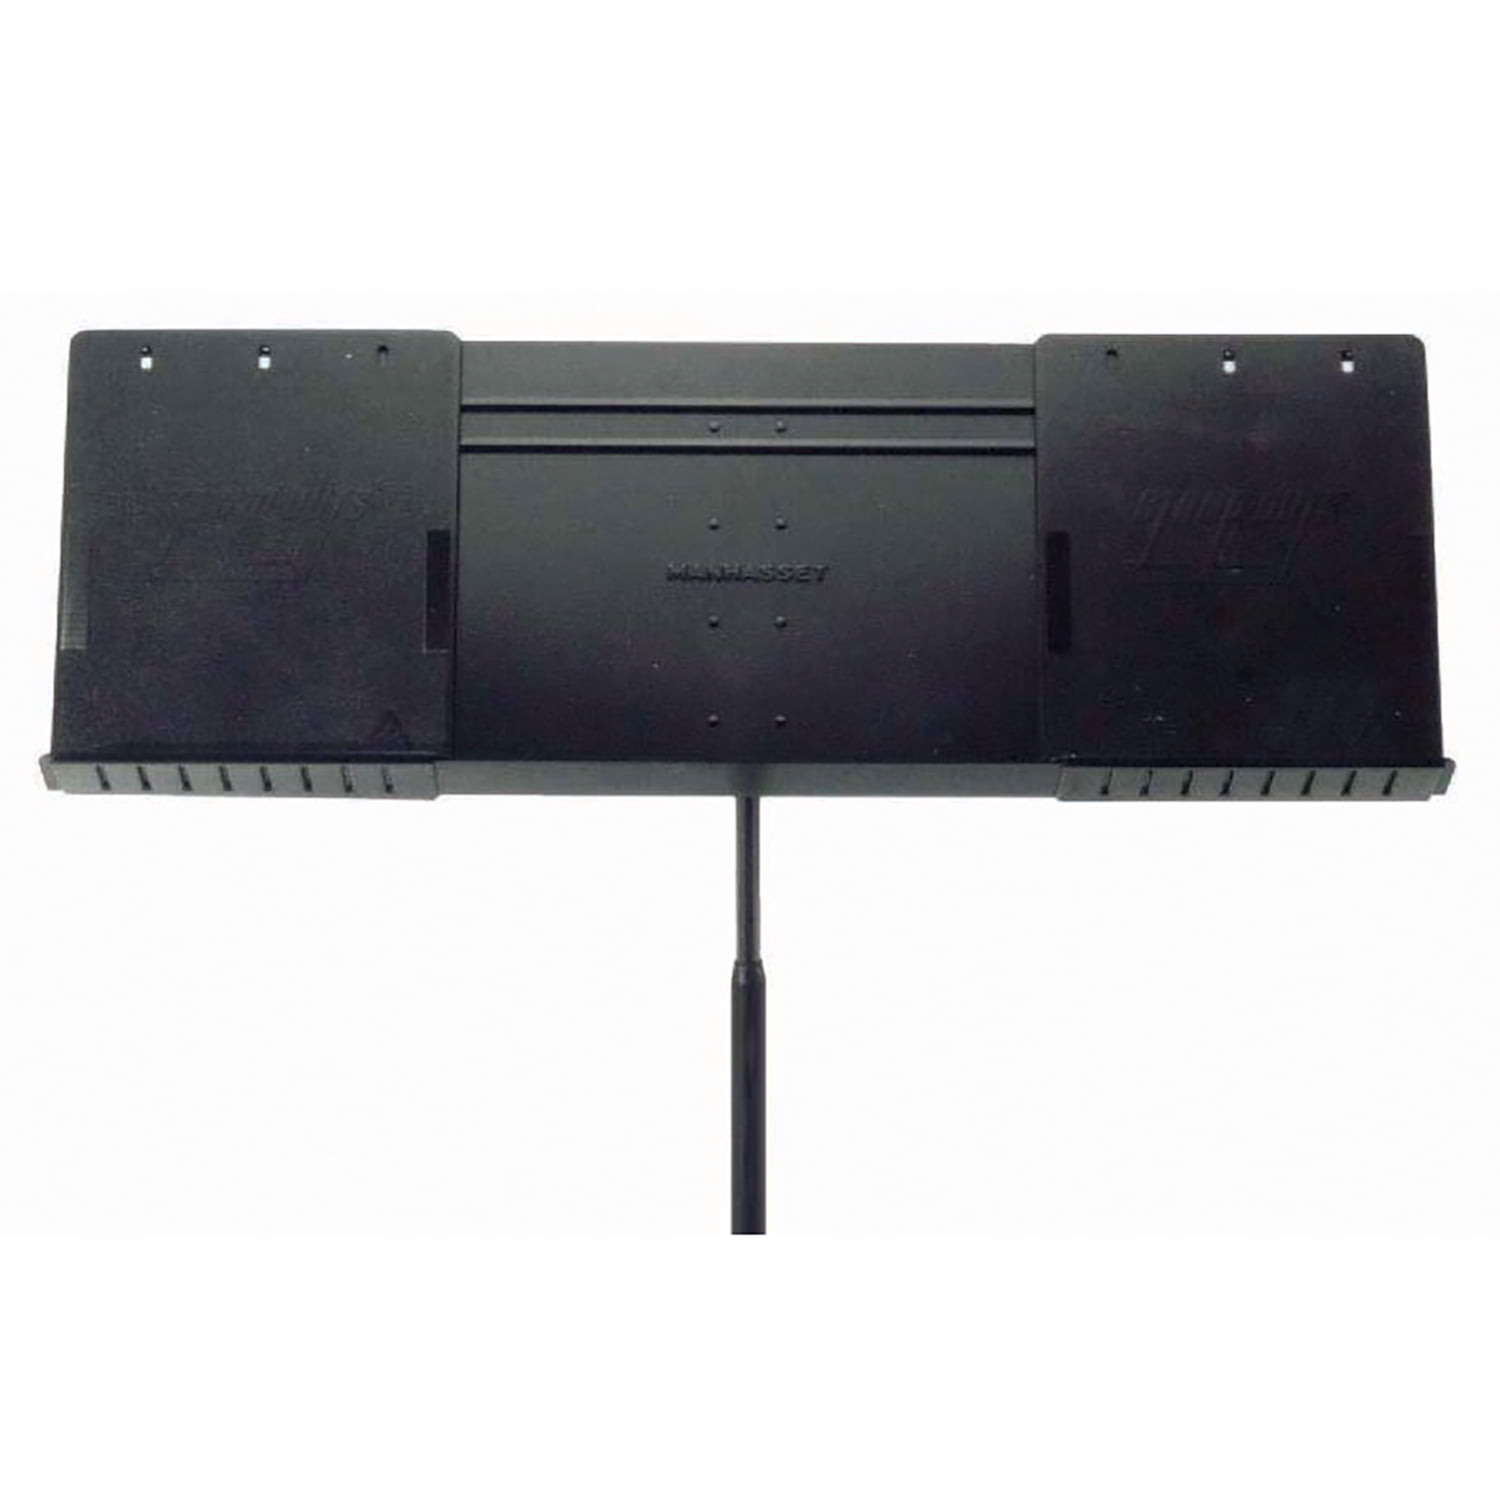 Wenger Norwood Pair Maestro Music Stand-Outs Extenders For Manhasset Hamilton 